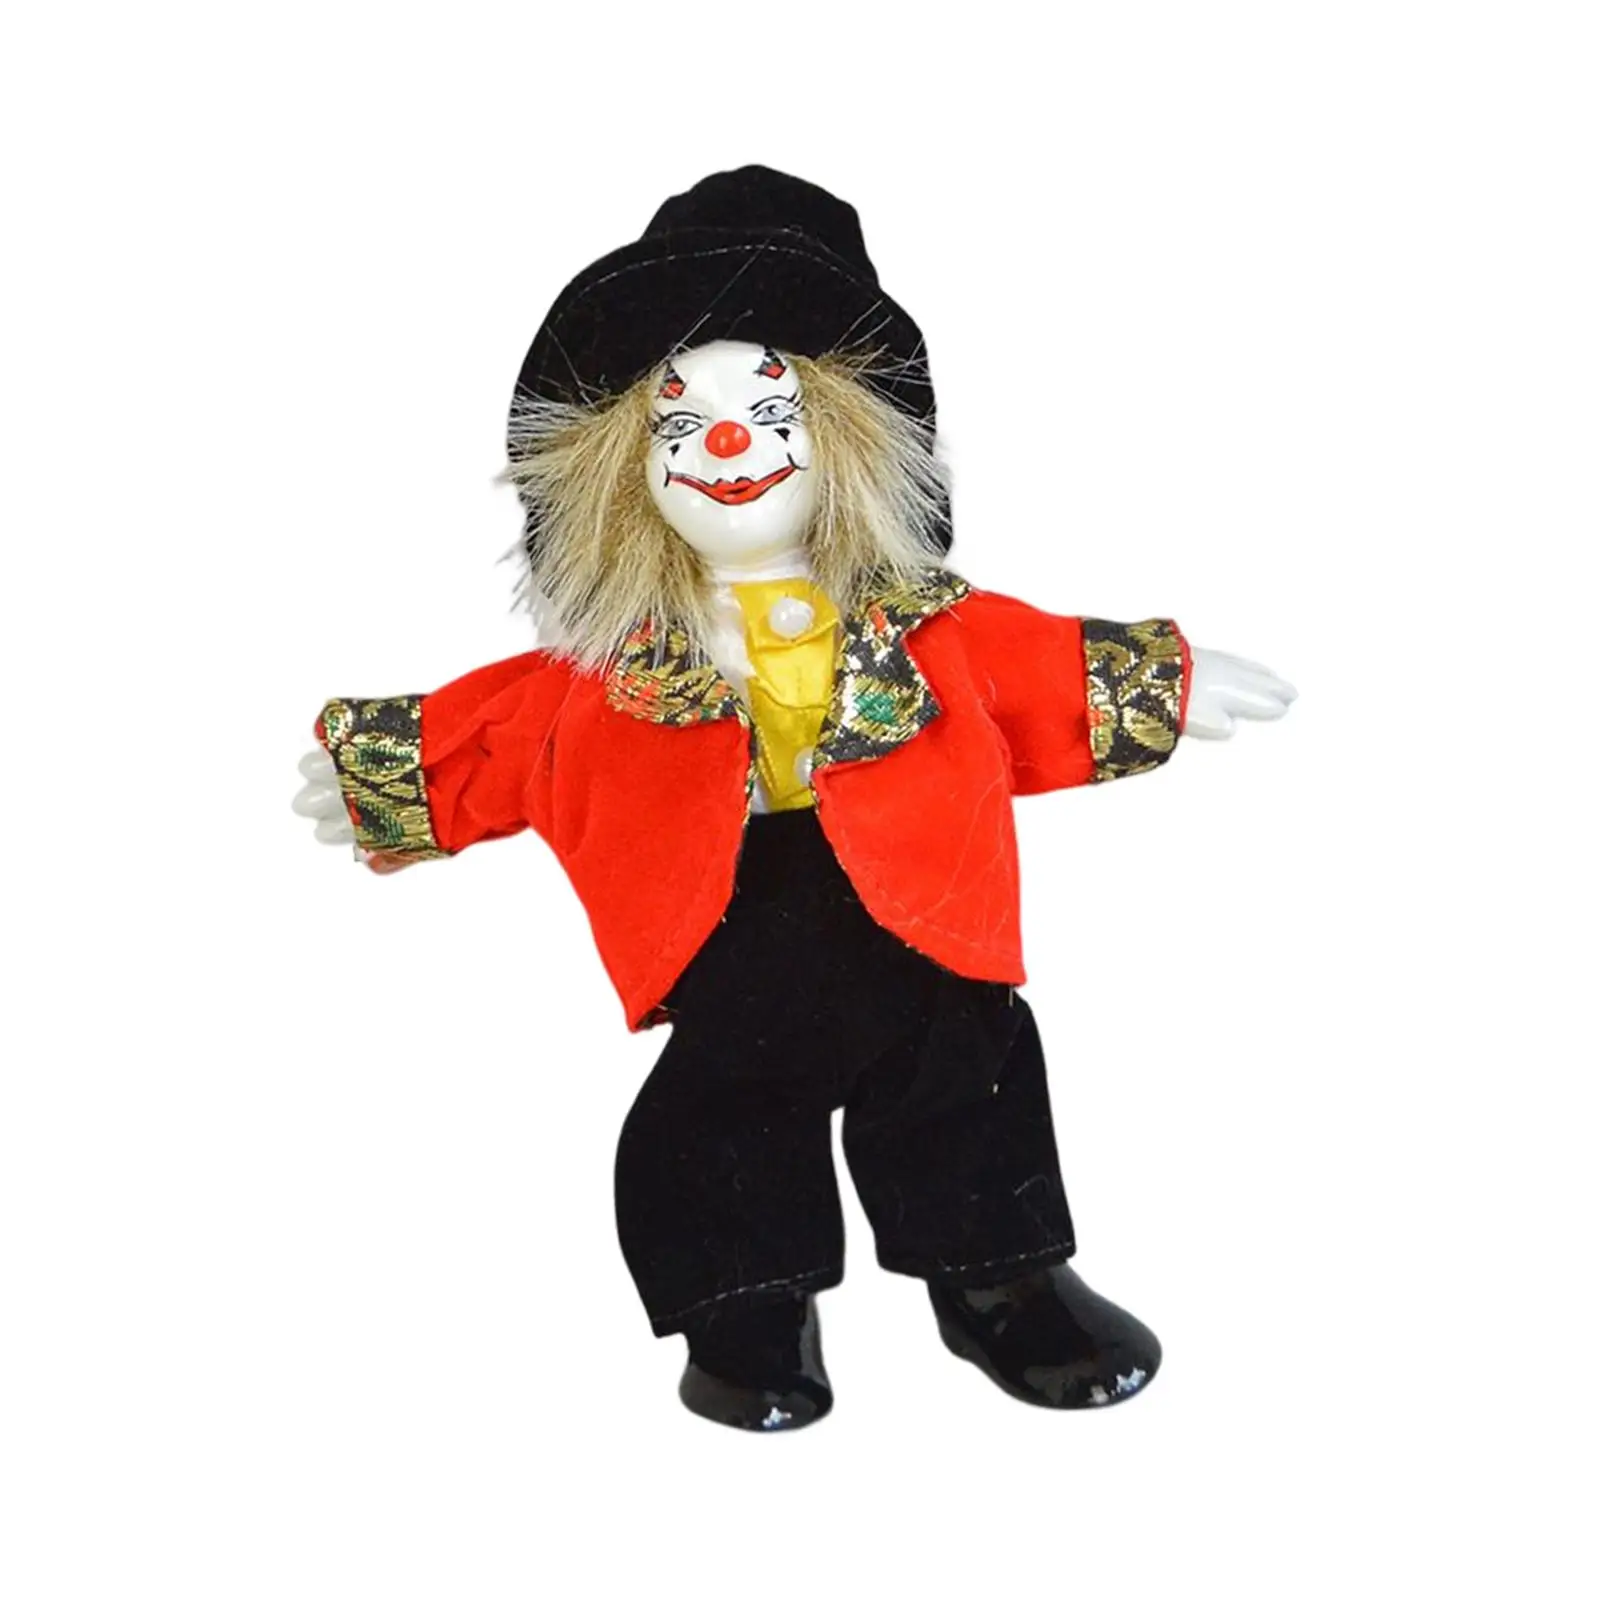 18cm Tall Clown Doll Figure Figurine Toy Table Desk Decor Movable for Desktop Bedroom Holiday Carnival Birthday Gifts